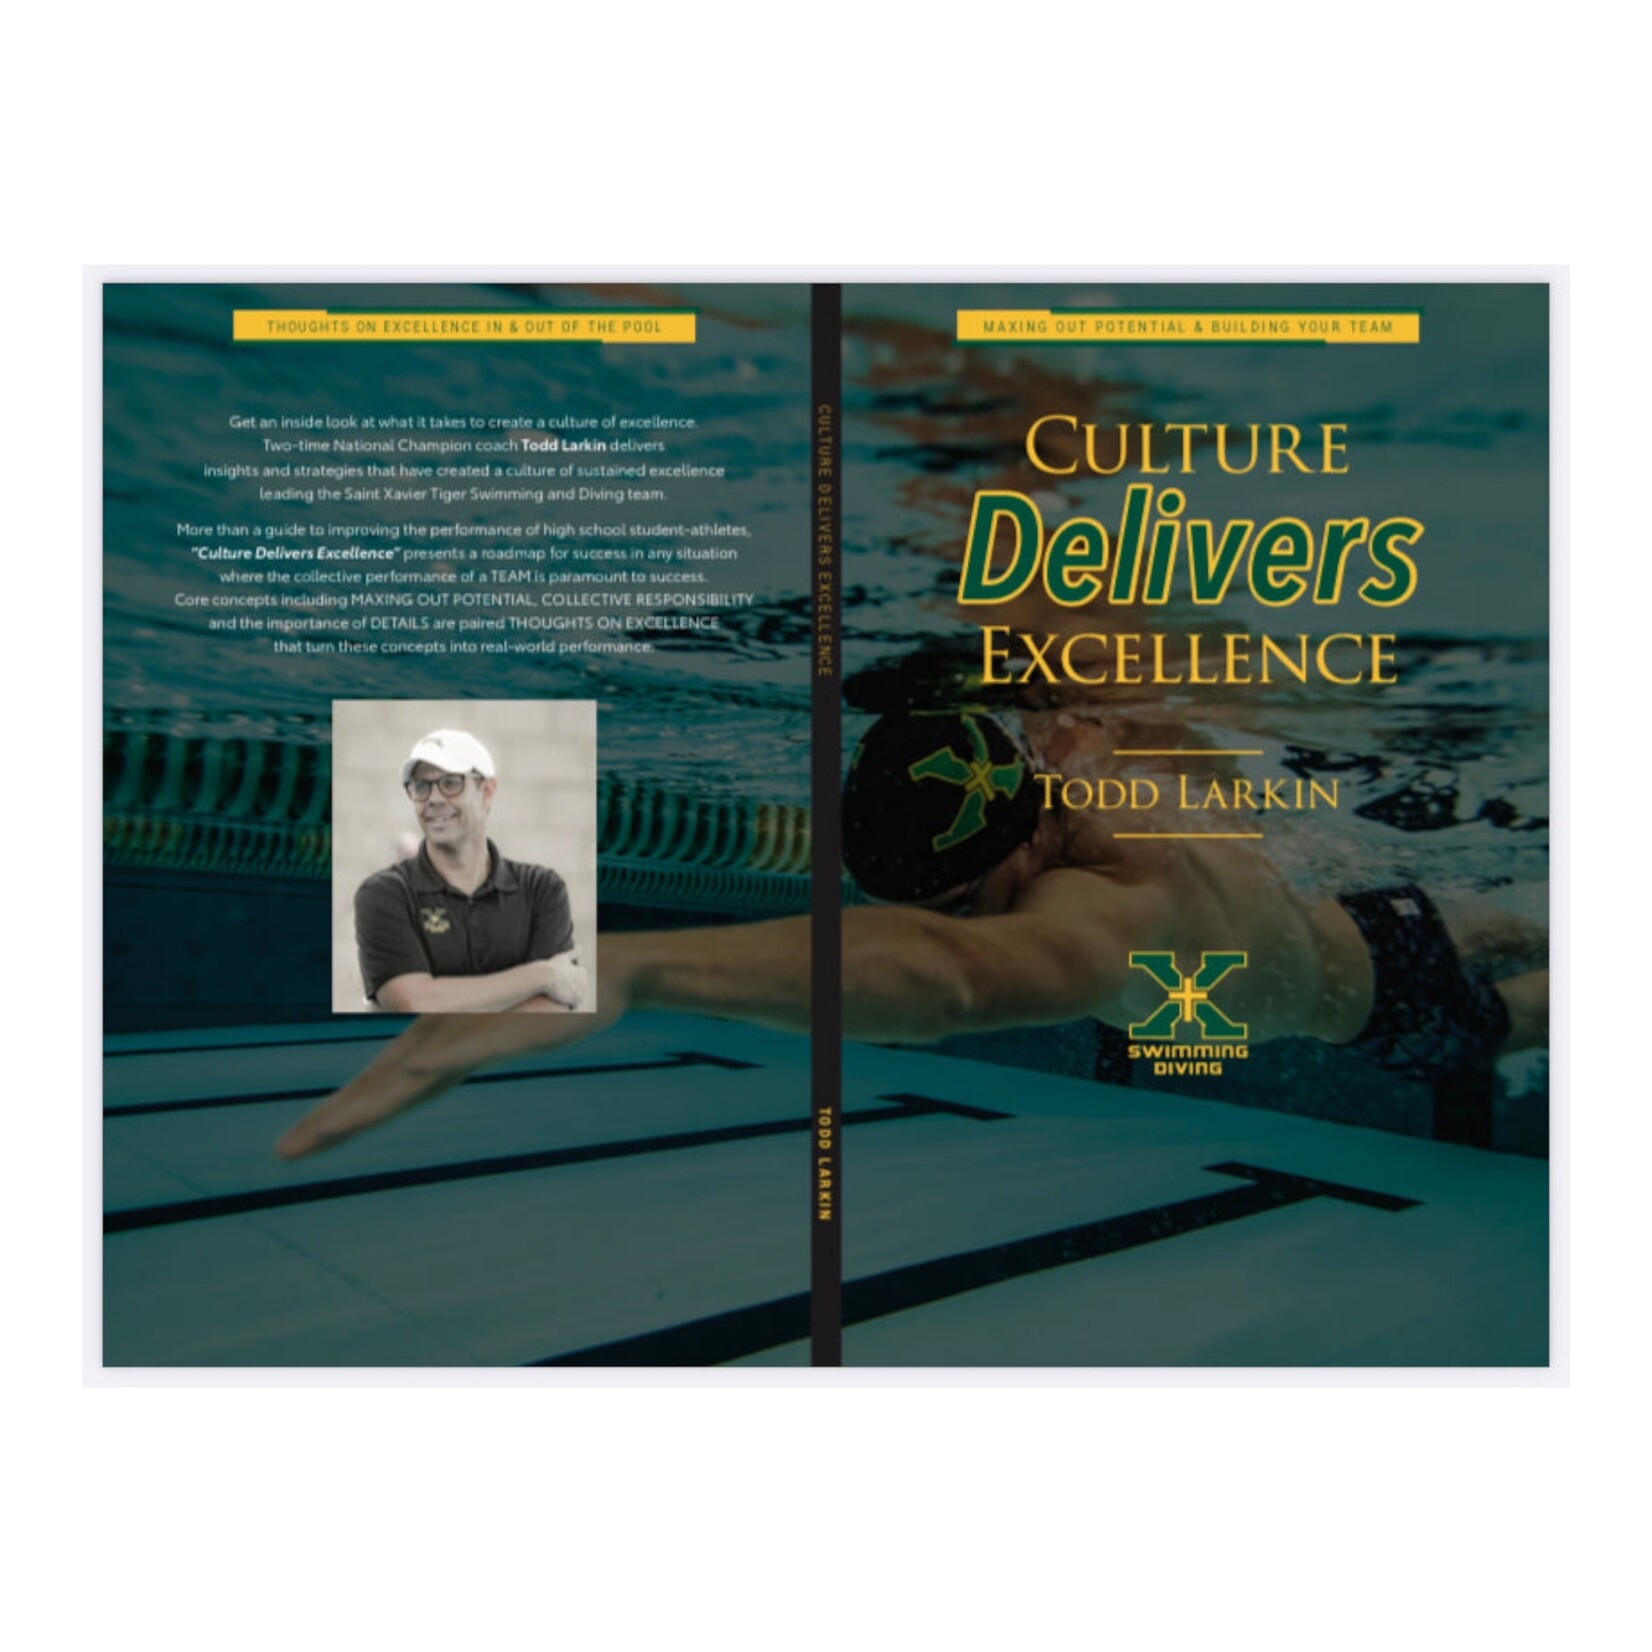 Culture Delivers Excellence by Todd Larkin